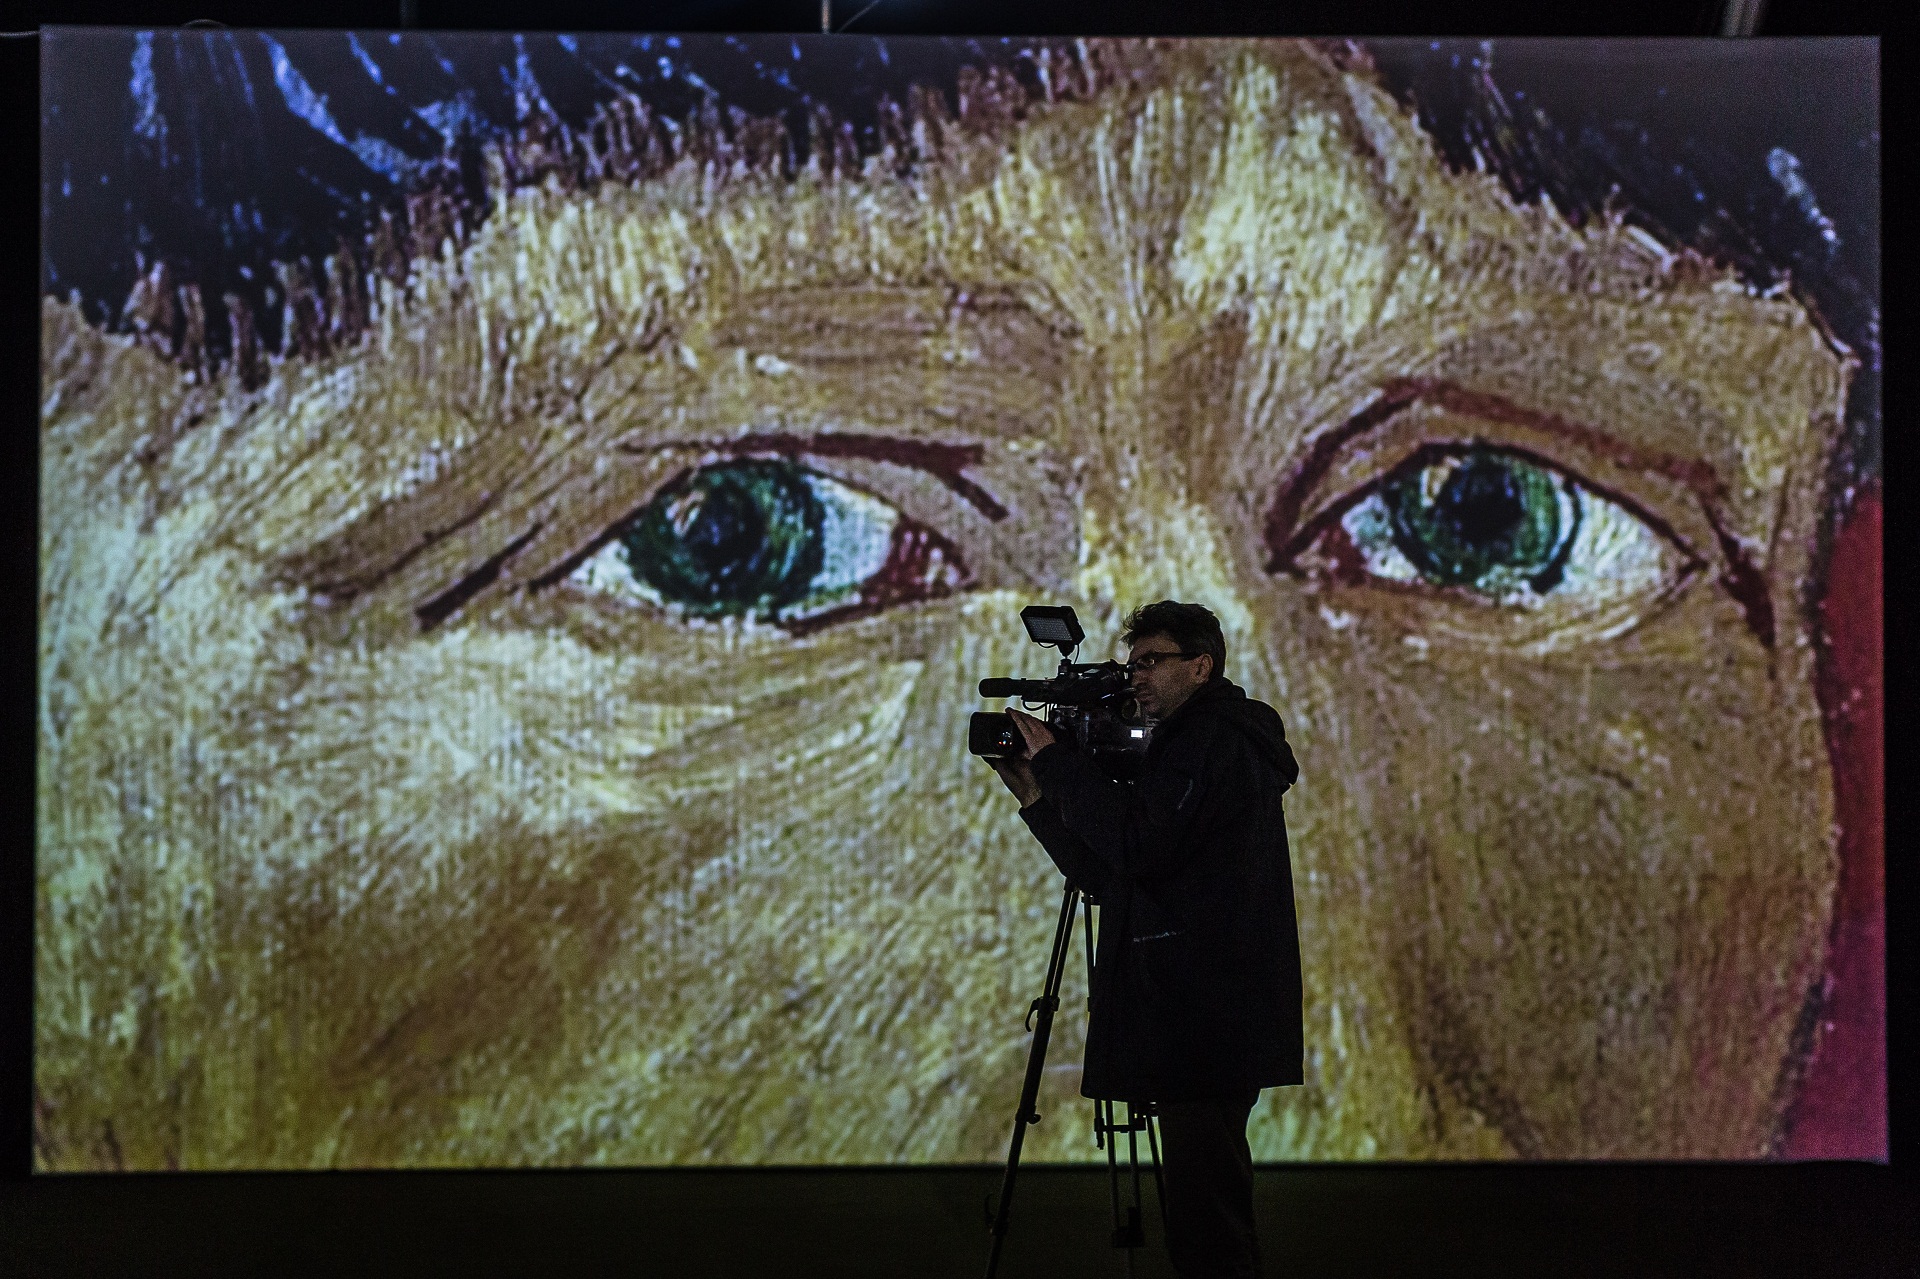 A cameraman films in front of a screen displaying part of a painting by Dutch artist Vincent Van Gogh during the official opening of the "Van Gogh Alive" multimedia exhibition in Warsaw, on November 13, 2015. AFP PHOTO / WOJTEK RADWANSKI
RESTRICTED TO EDITORIAL USE - MANDATORY MENTION OF THE EXHIBITION UPON PUBLICATION, TO ILLUSTRATE THE EVENT AS SPECIFIED IN THE CAPTION (Photo by WOJTEK RADWANSKI / AFP)